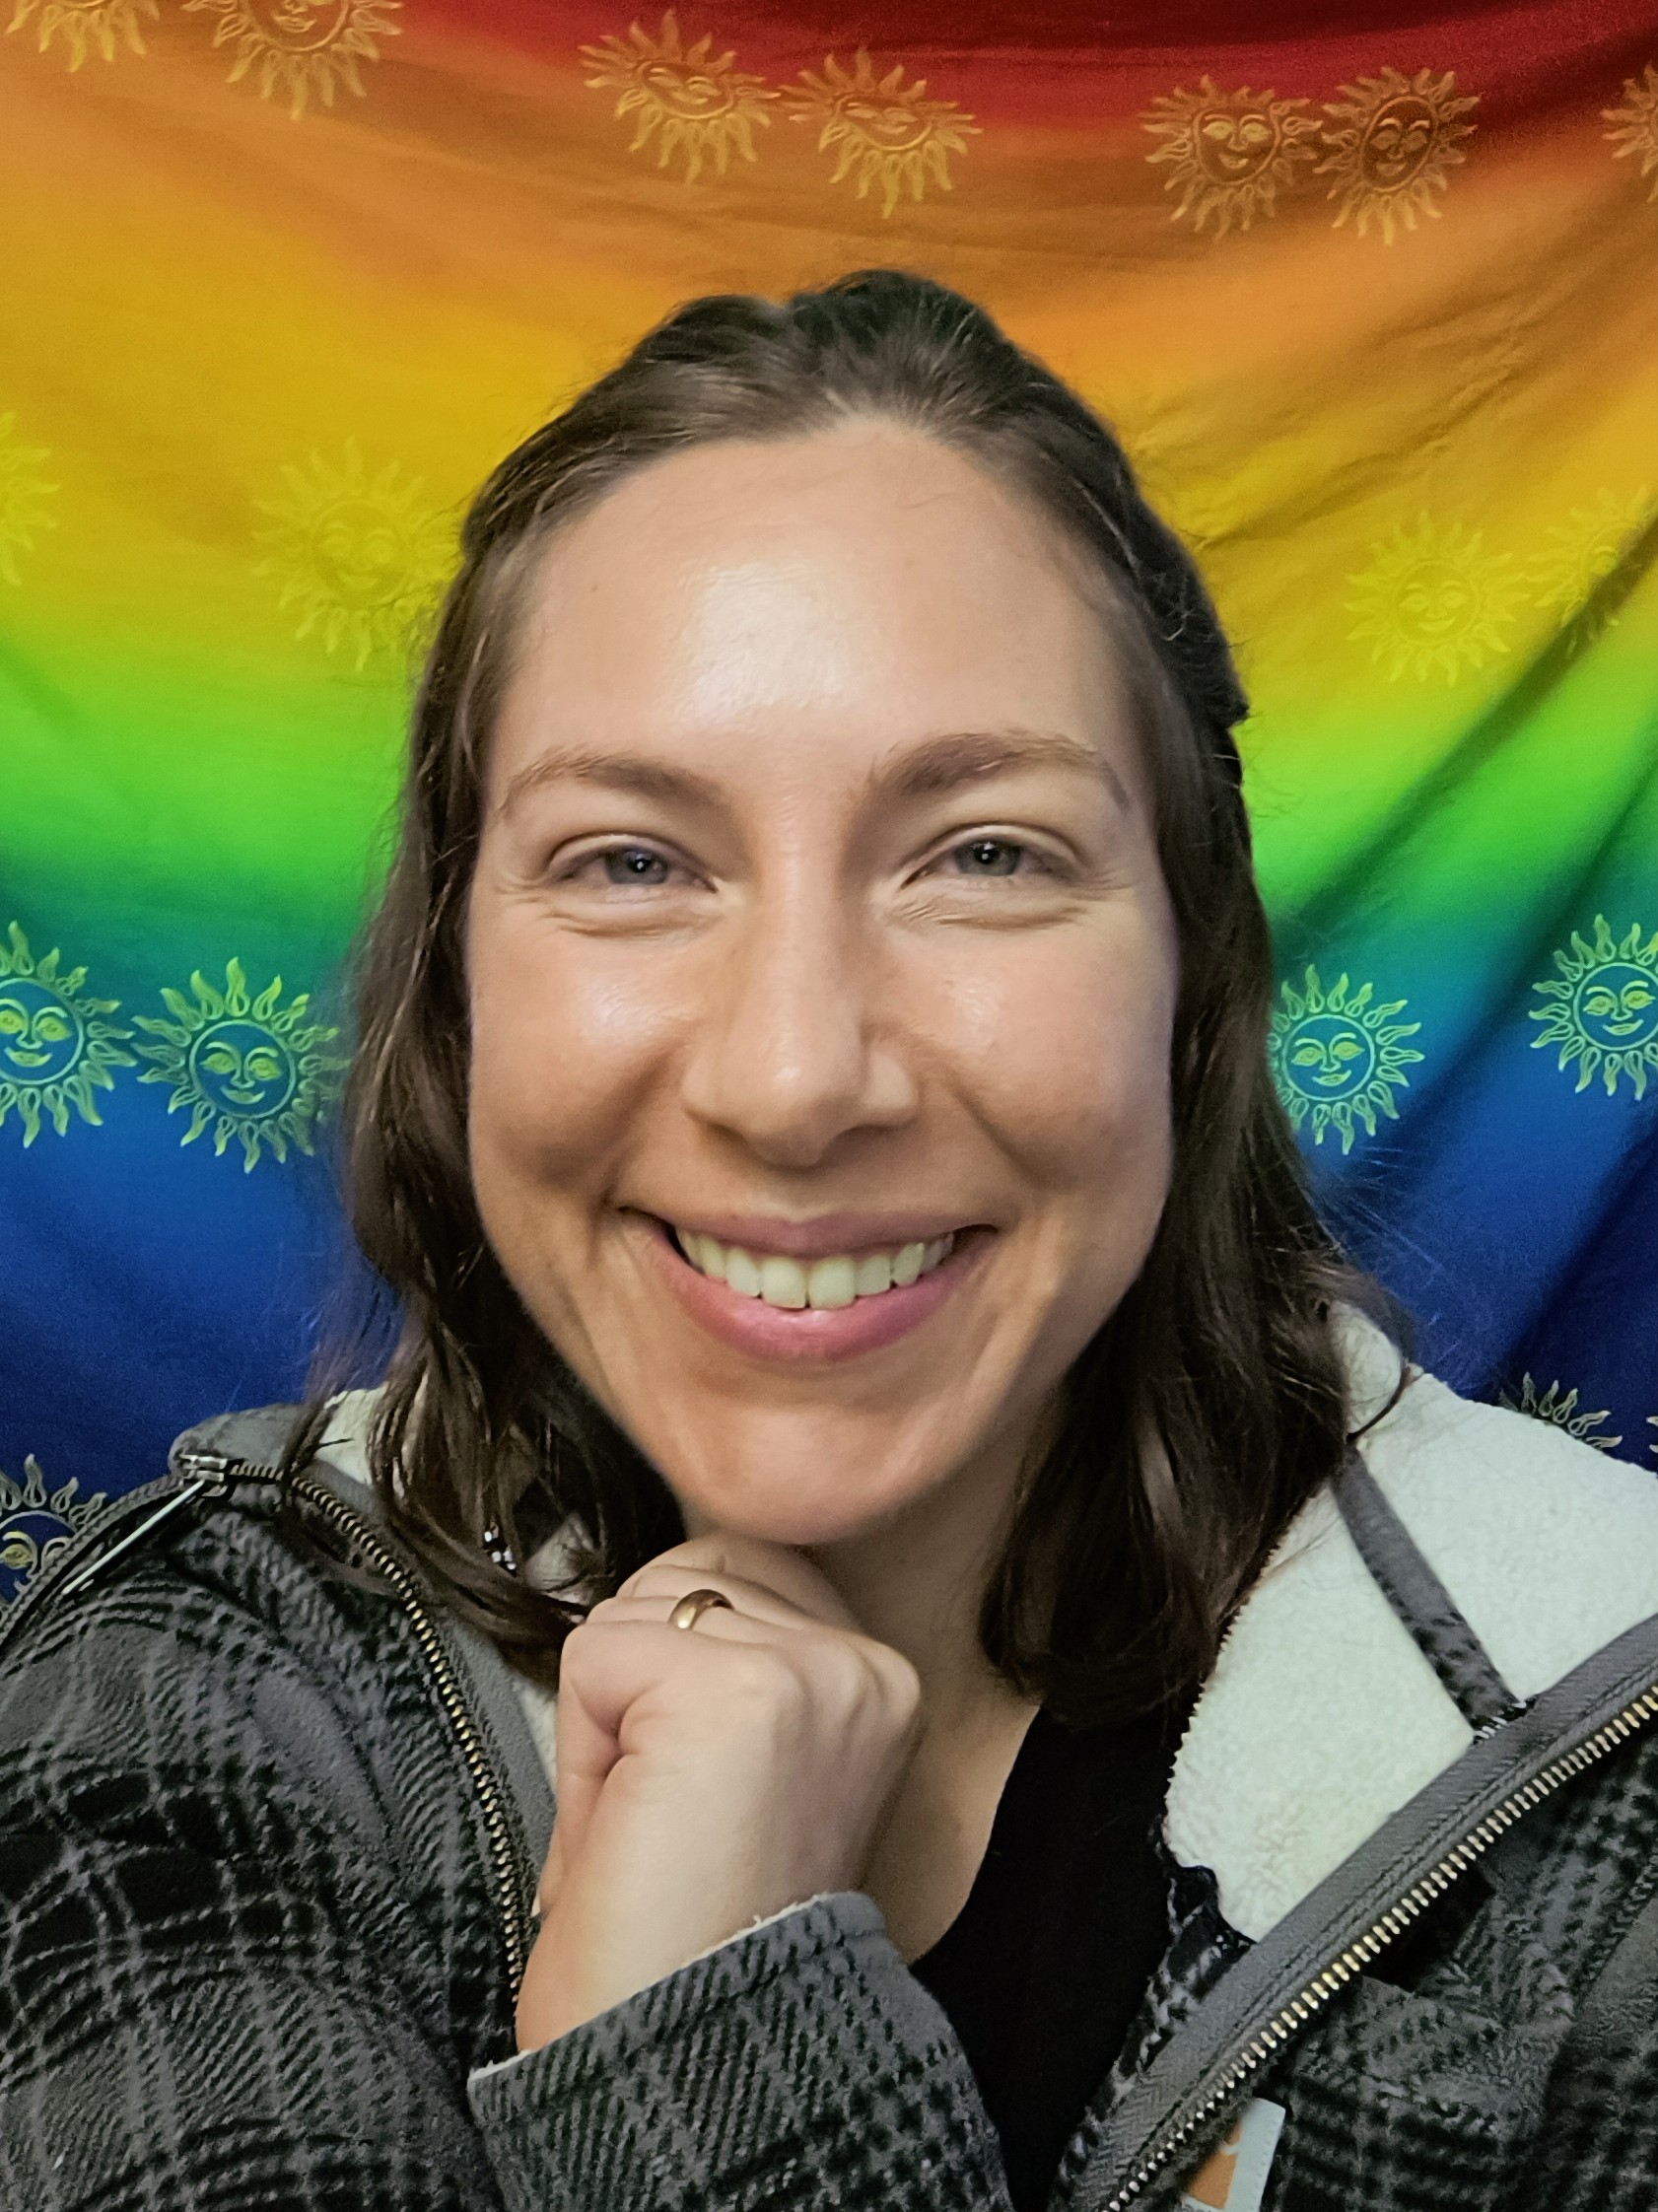 Justene wears a plaid fleece jacket and shoulder-length hair. She smiles in front of a rainbow cloth decorated with suns.